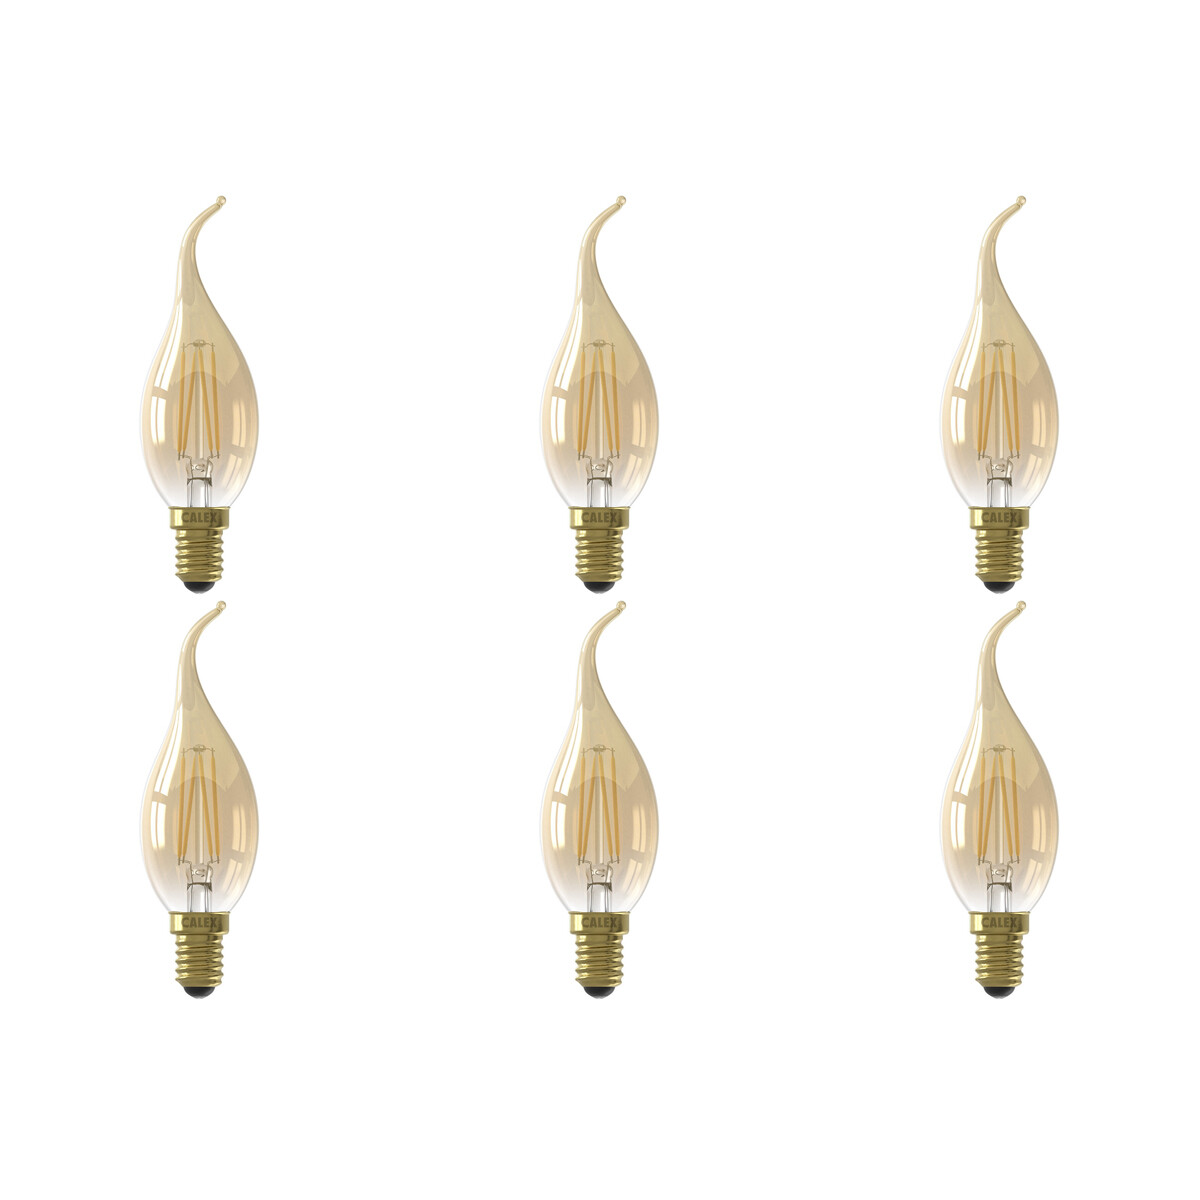 CALEX - LED Lamp 6 Pack - Kaarslamp Filament BXS35 - E14 Fitting - 3.5W - Warm Wit 2100K - Goud